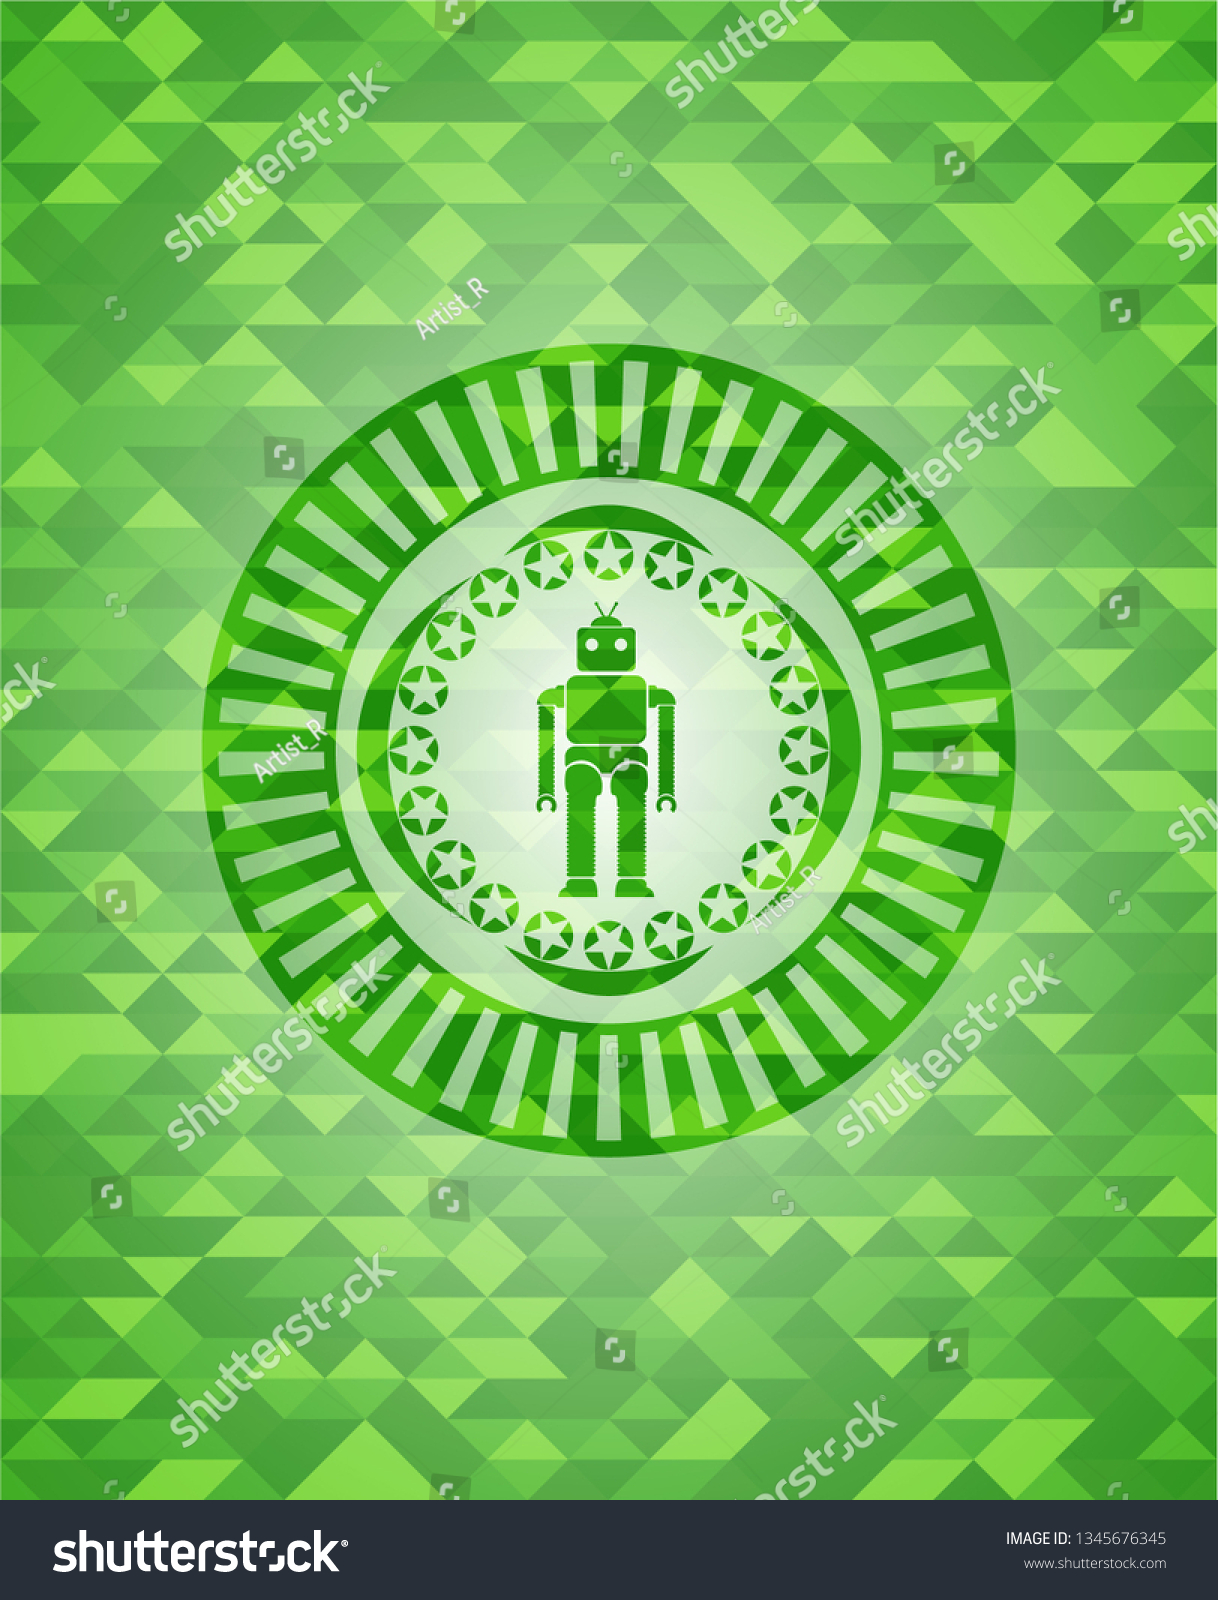 robot icon inside green emblem with mosaic background #1345676345